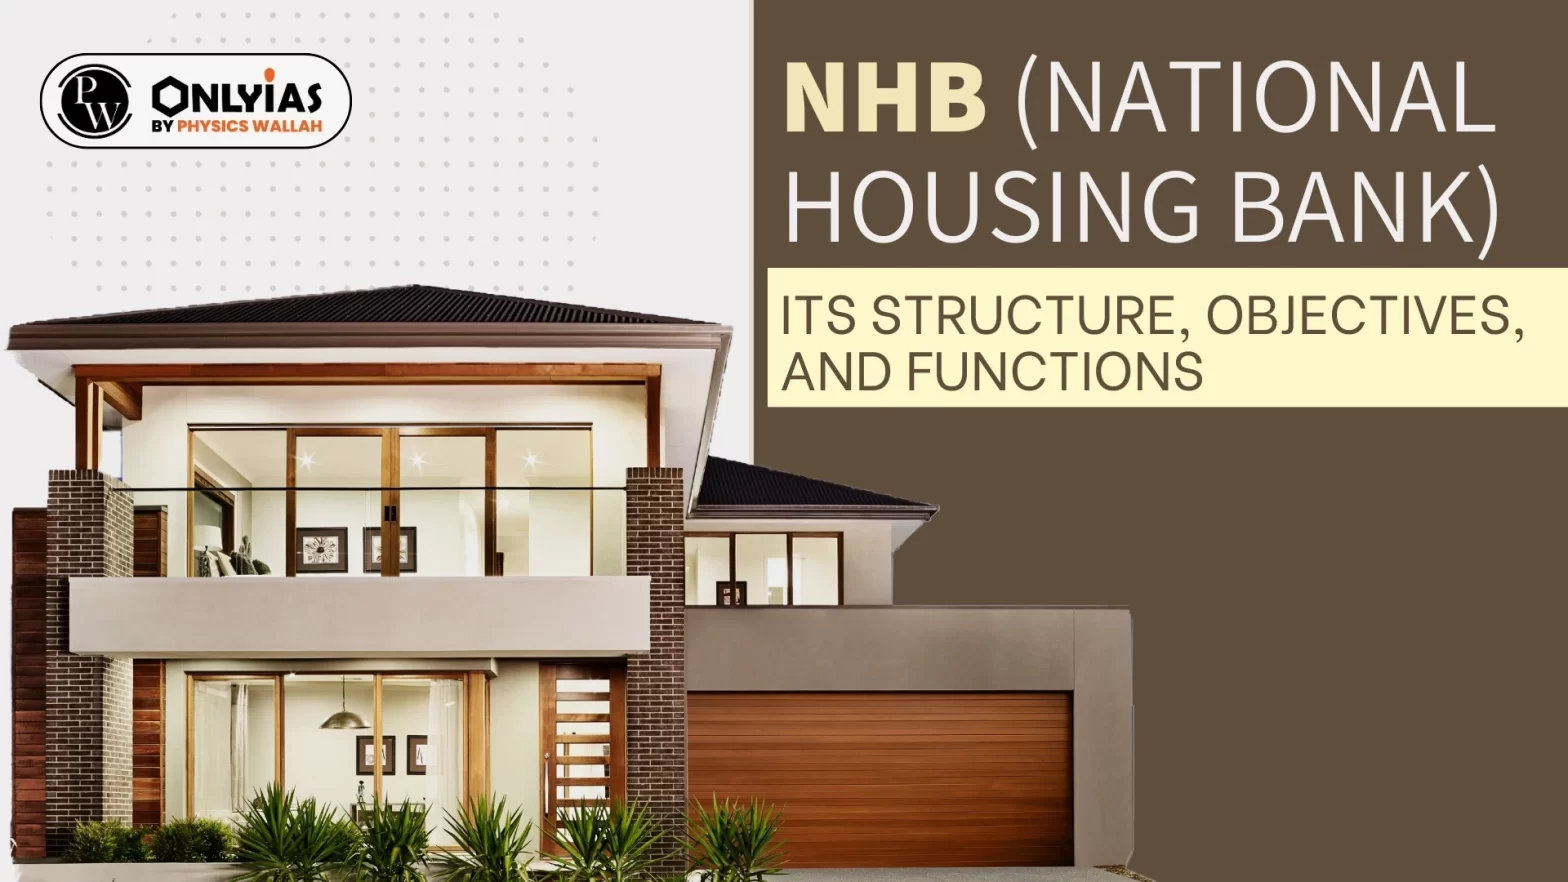 NHB (National Housing Bank): Its Structure, Objectives, and Functions